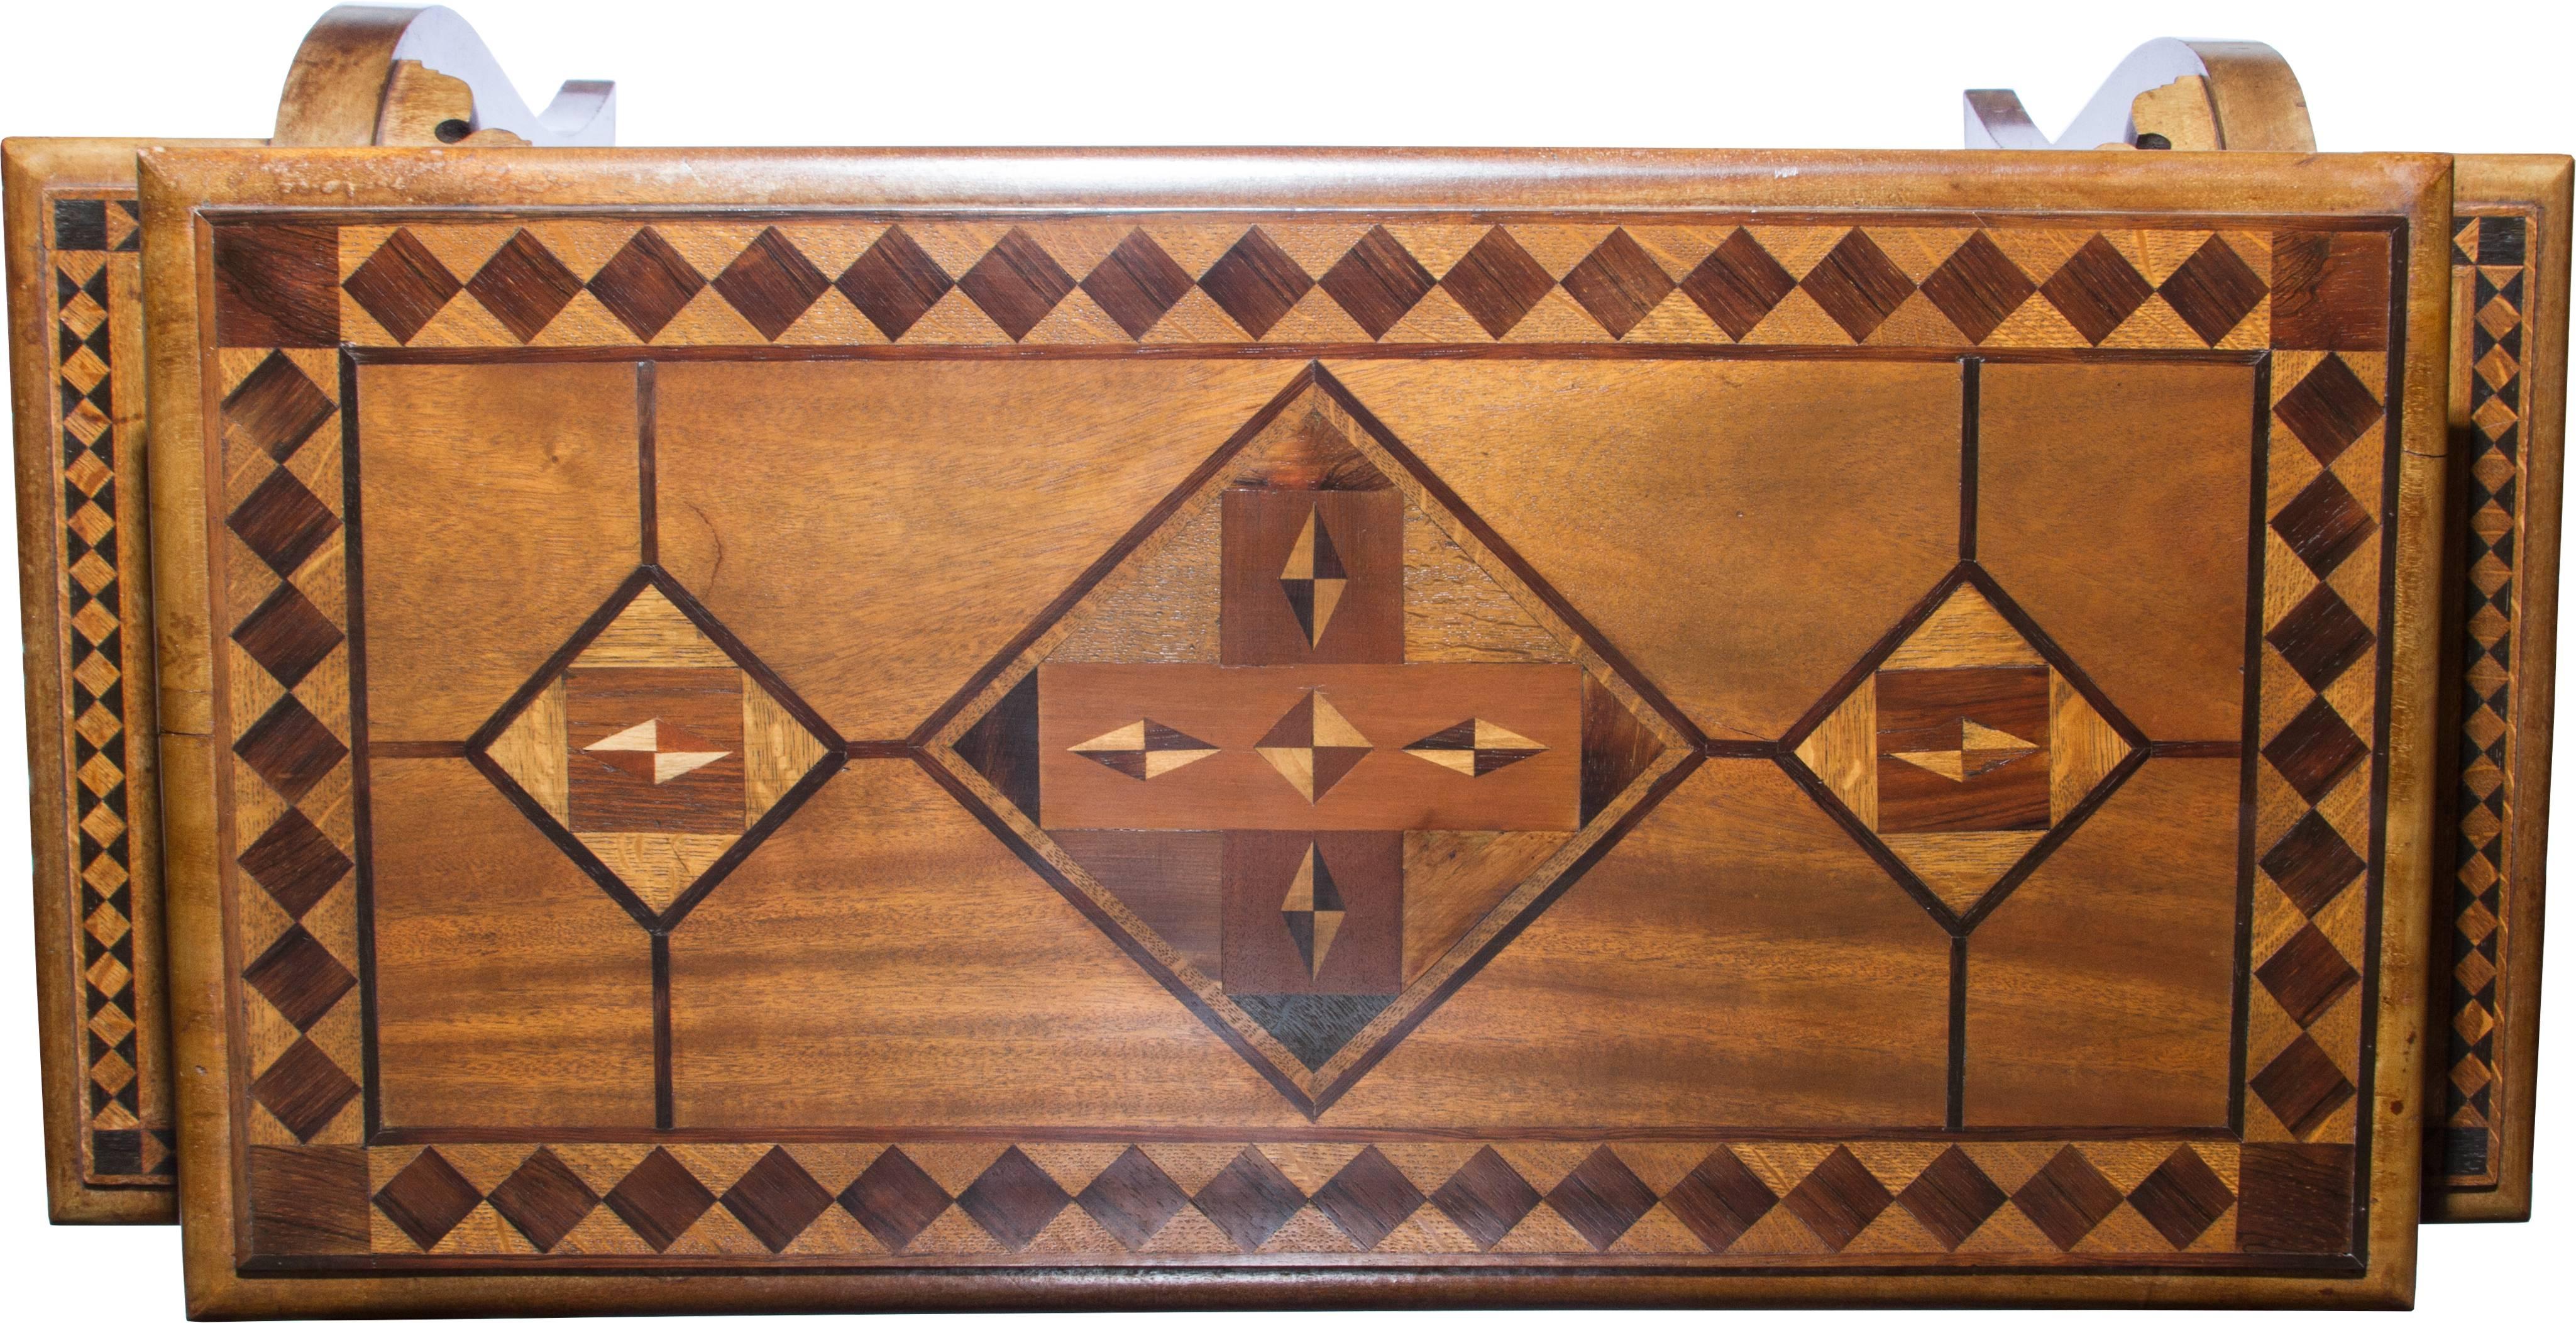 Early 20th Century Folk Art Inlaid Wooden Table For Sale